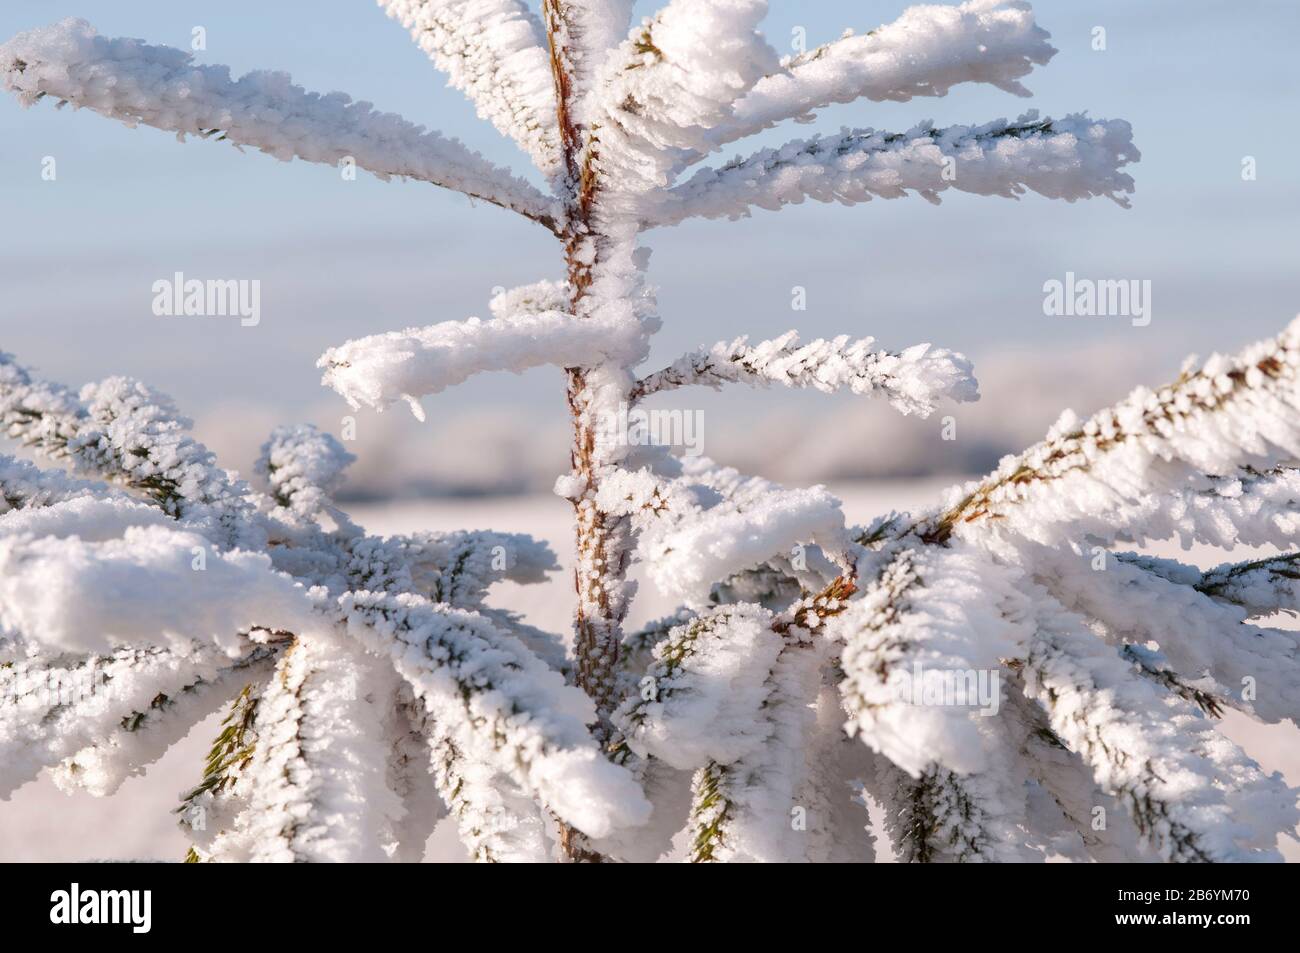 Close-up of hoar frost covering twigs on a tree Stock Photo